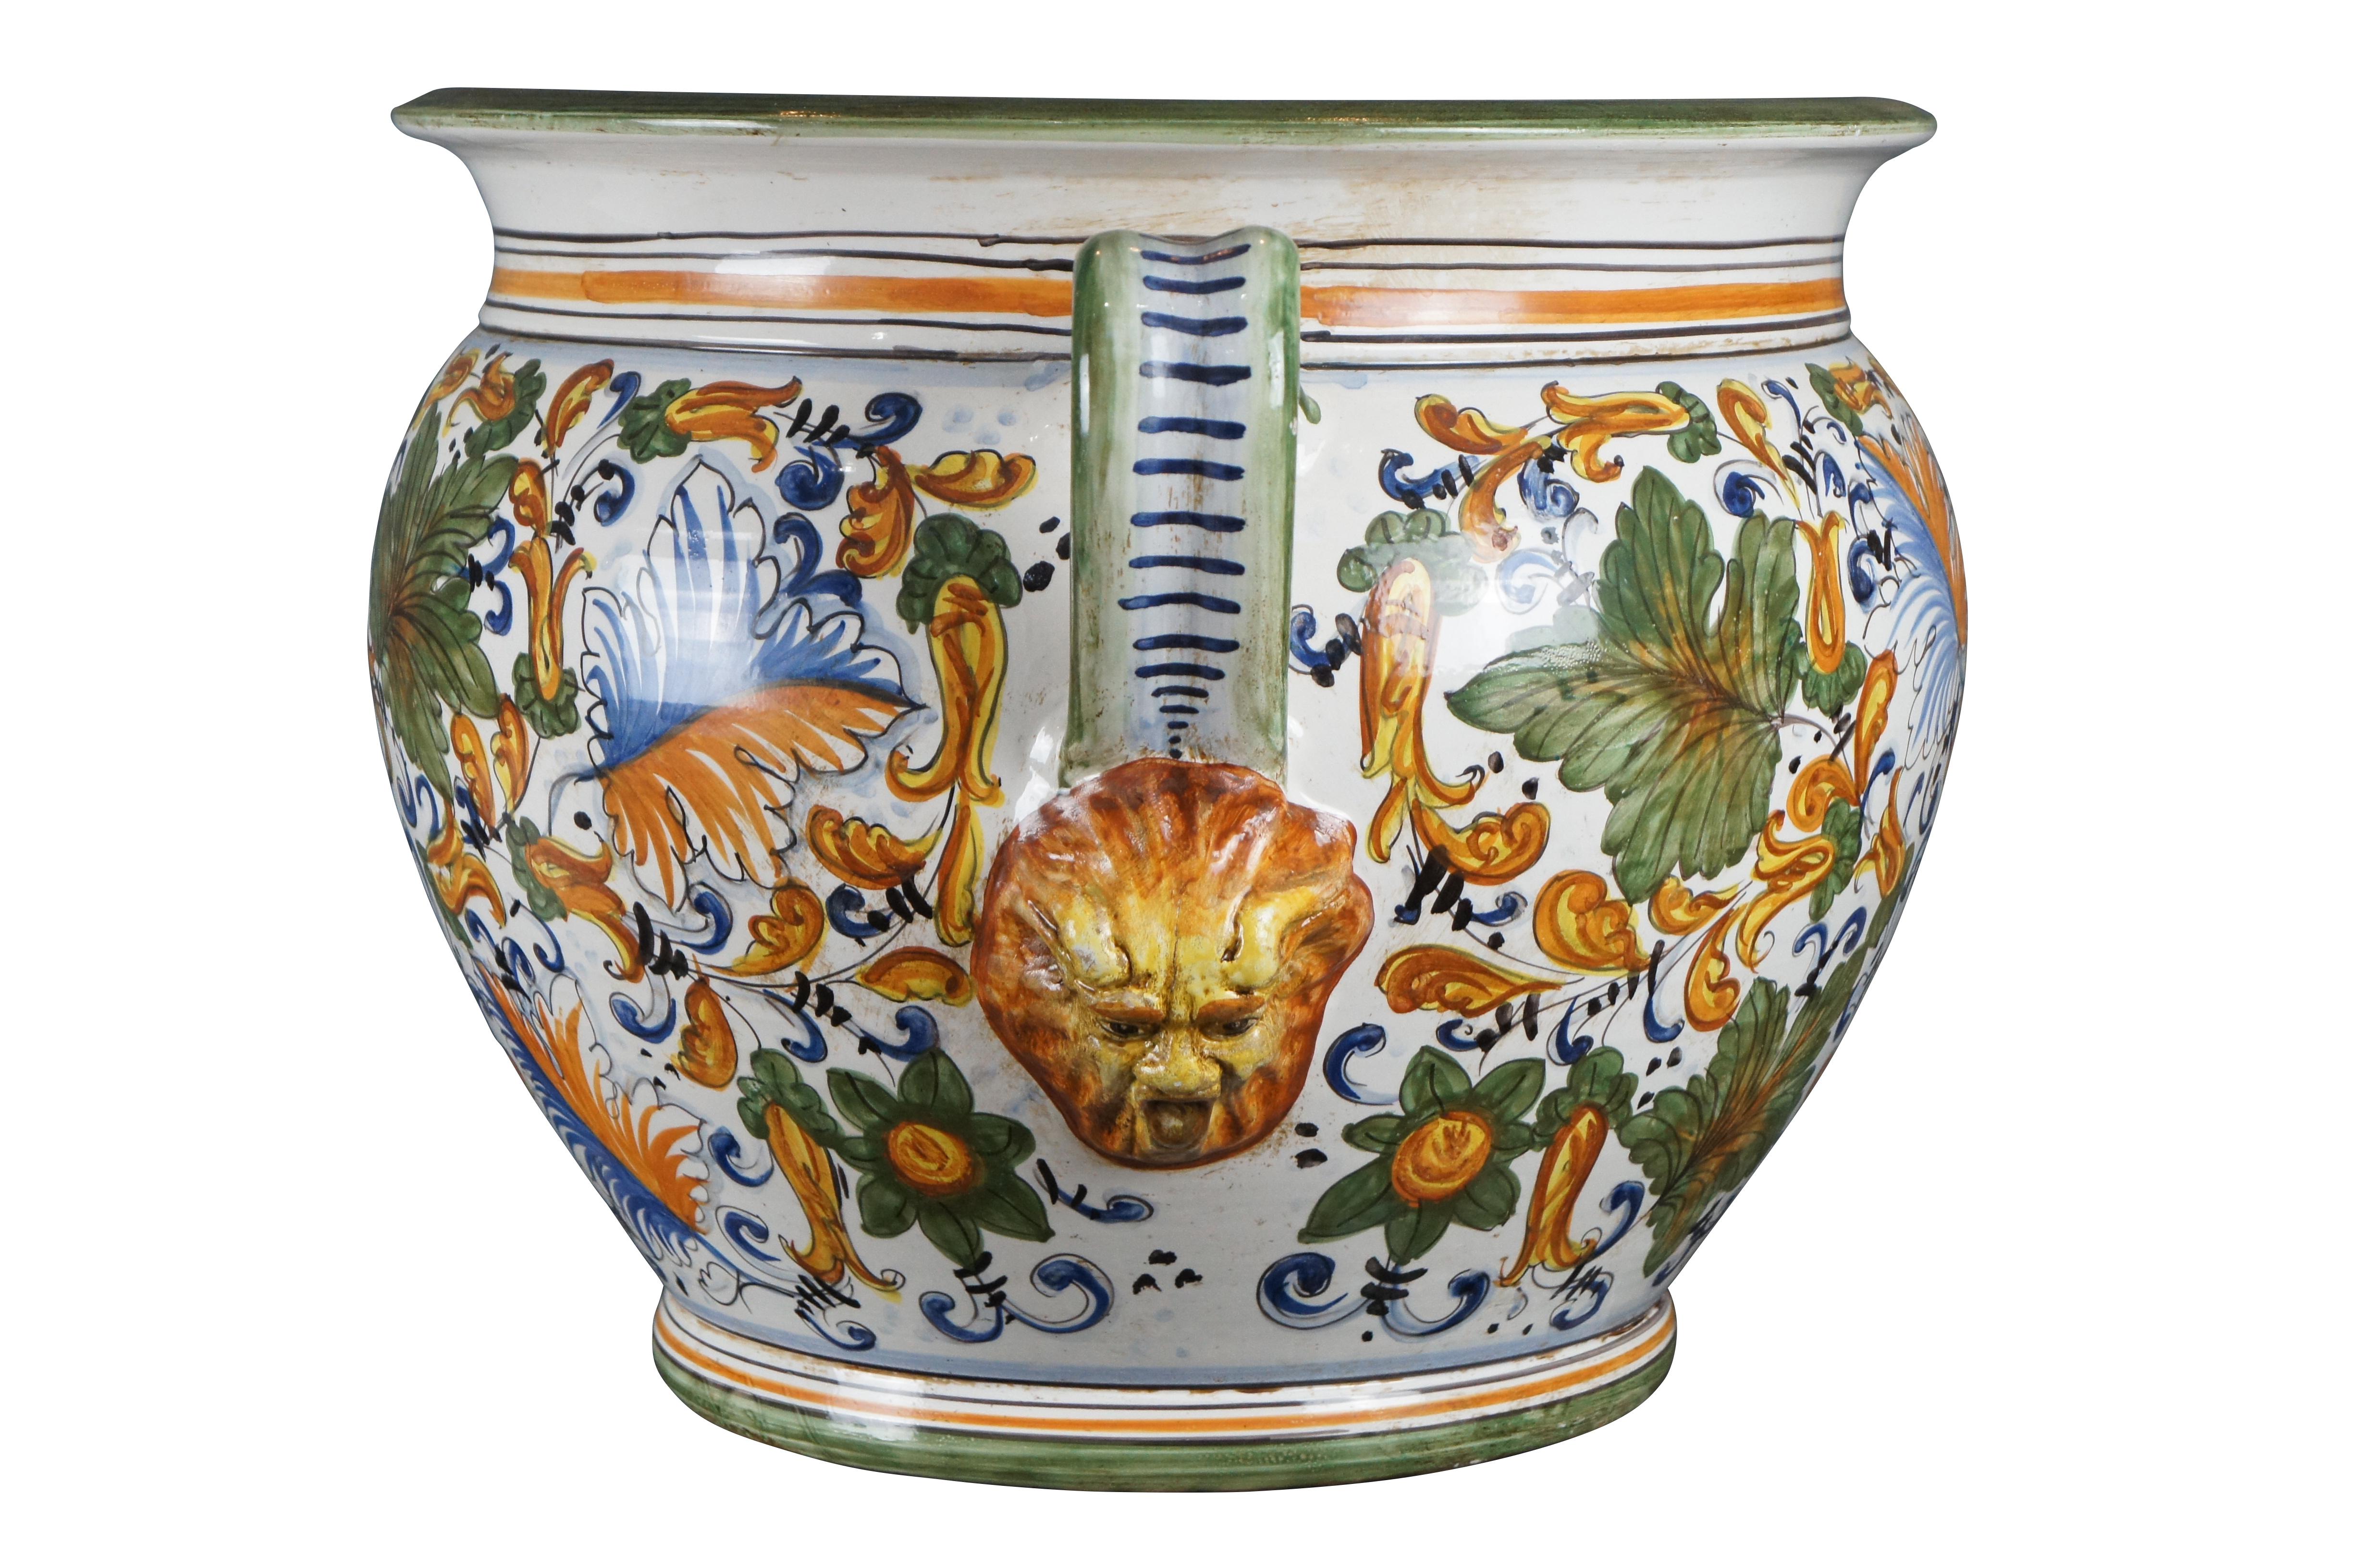 A beautiful 20th century Caffaggiolo jardiniere by Deruta pottery. Features a polychrome finish with elegant scrolling folitate motifs. The planter is handled with figural northwind face beneath. Exceptional craftmanship and color. Made in